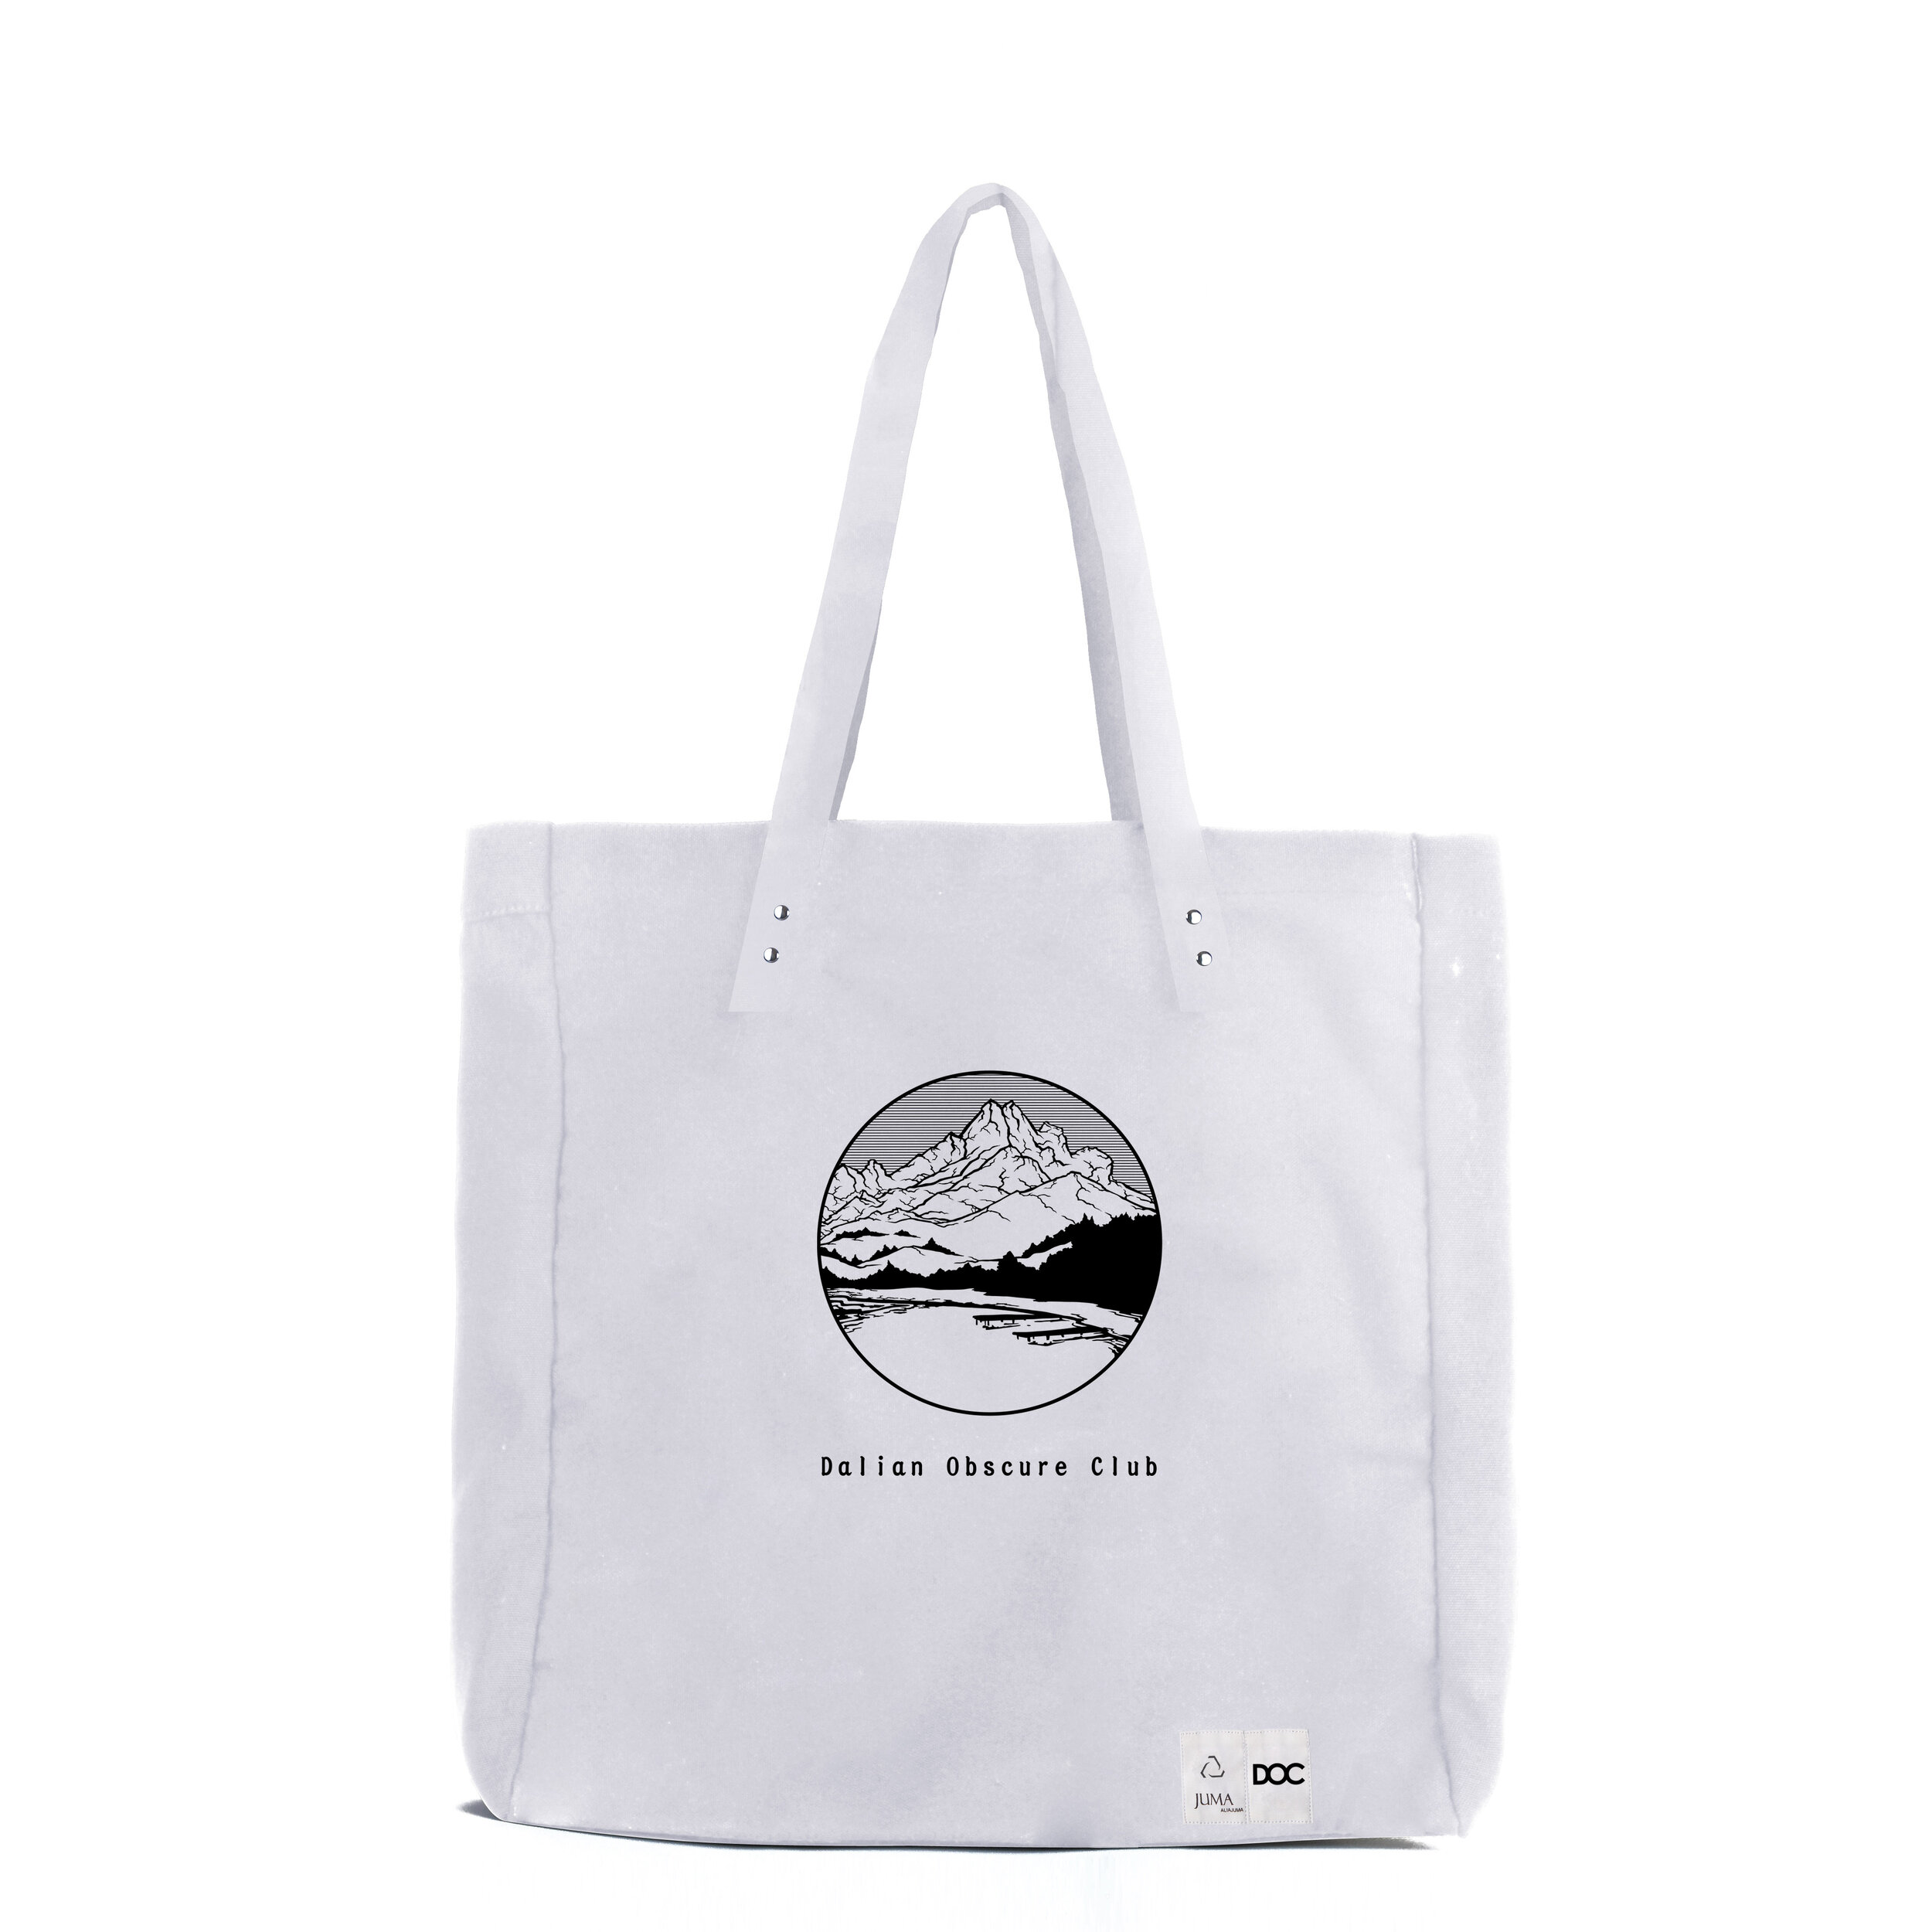 Dalian Obscure Club Tote Bag – 3 Recycled Water Bottles – White